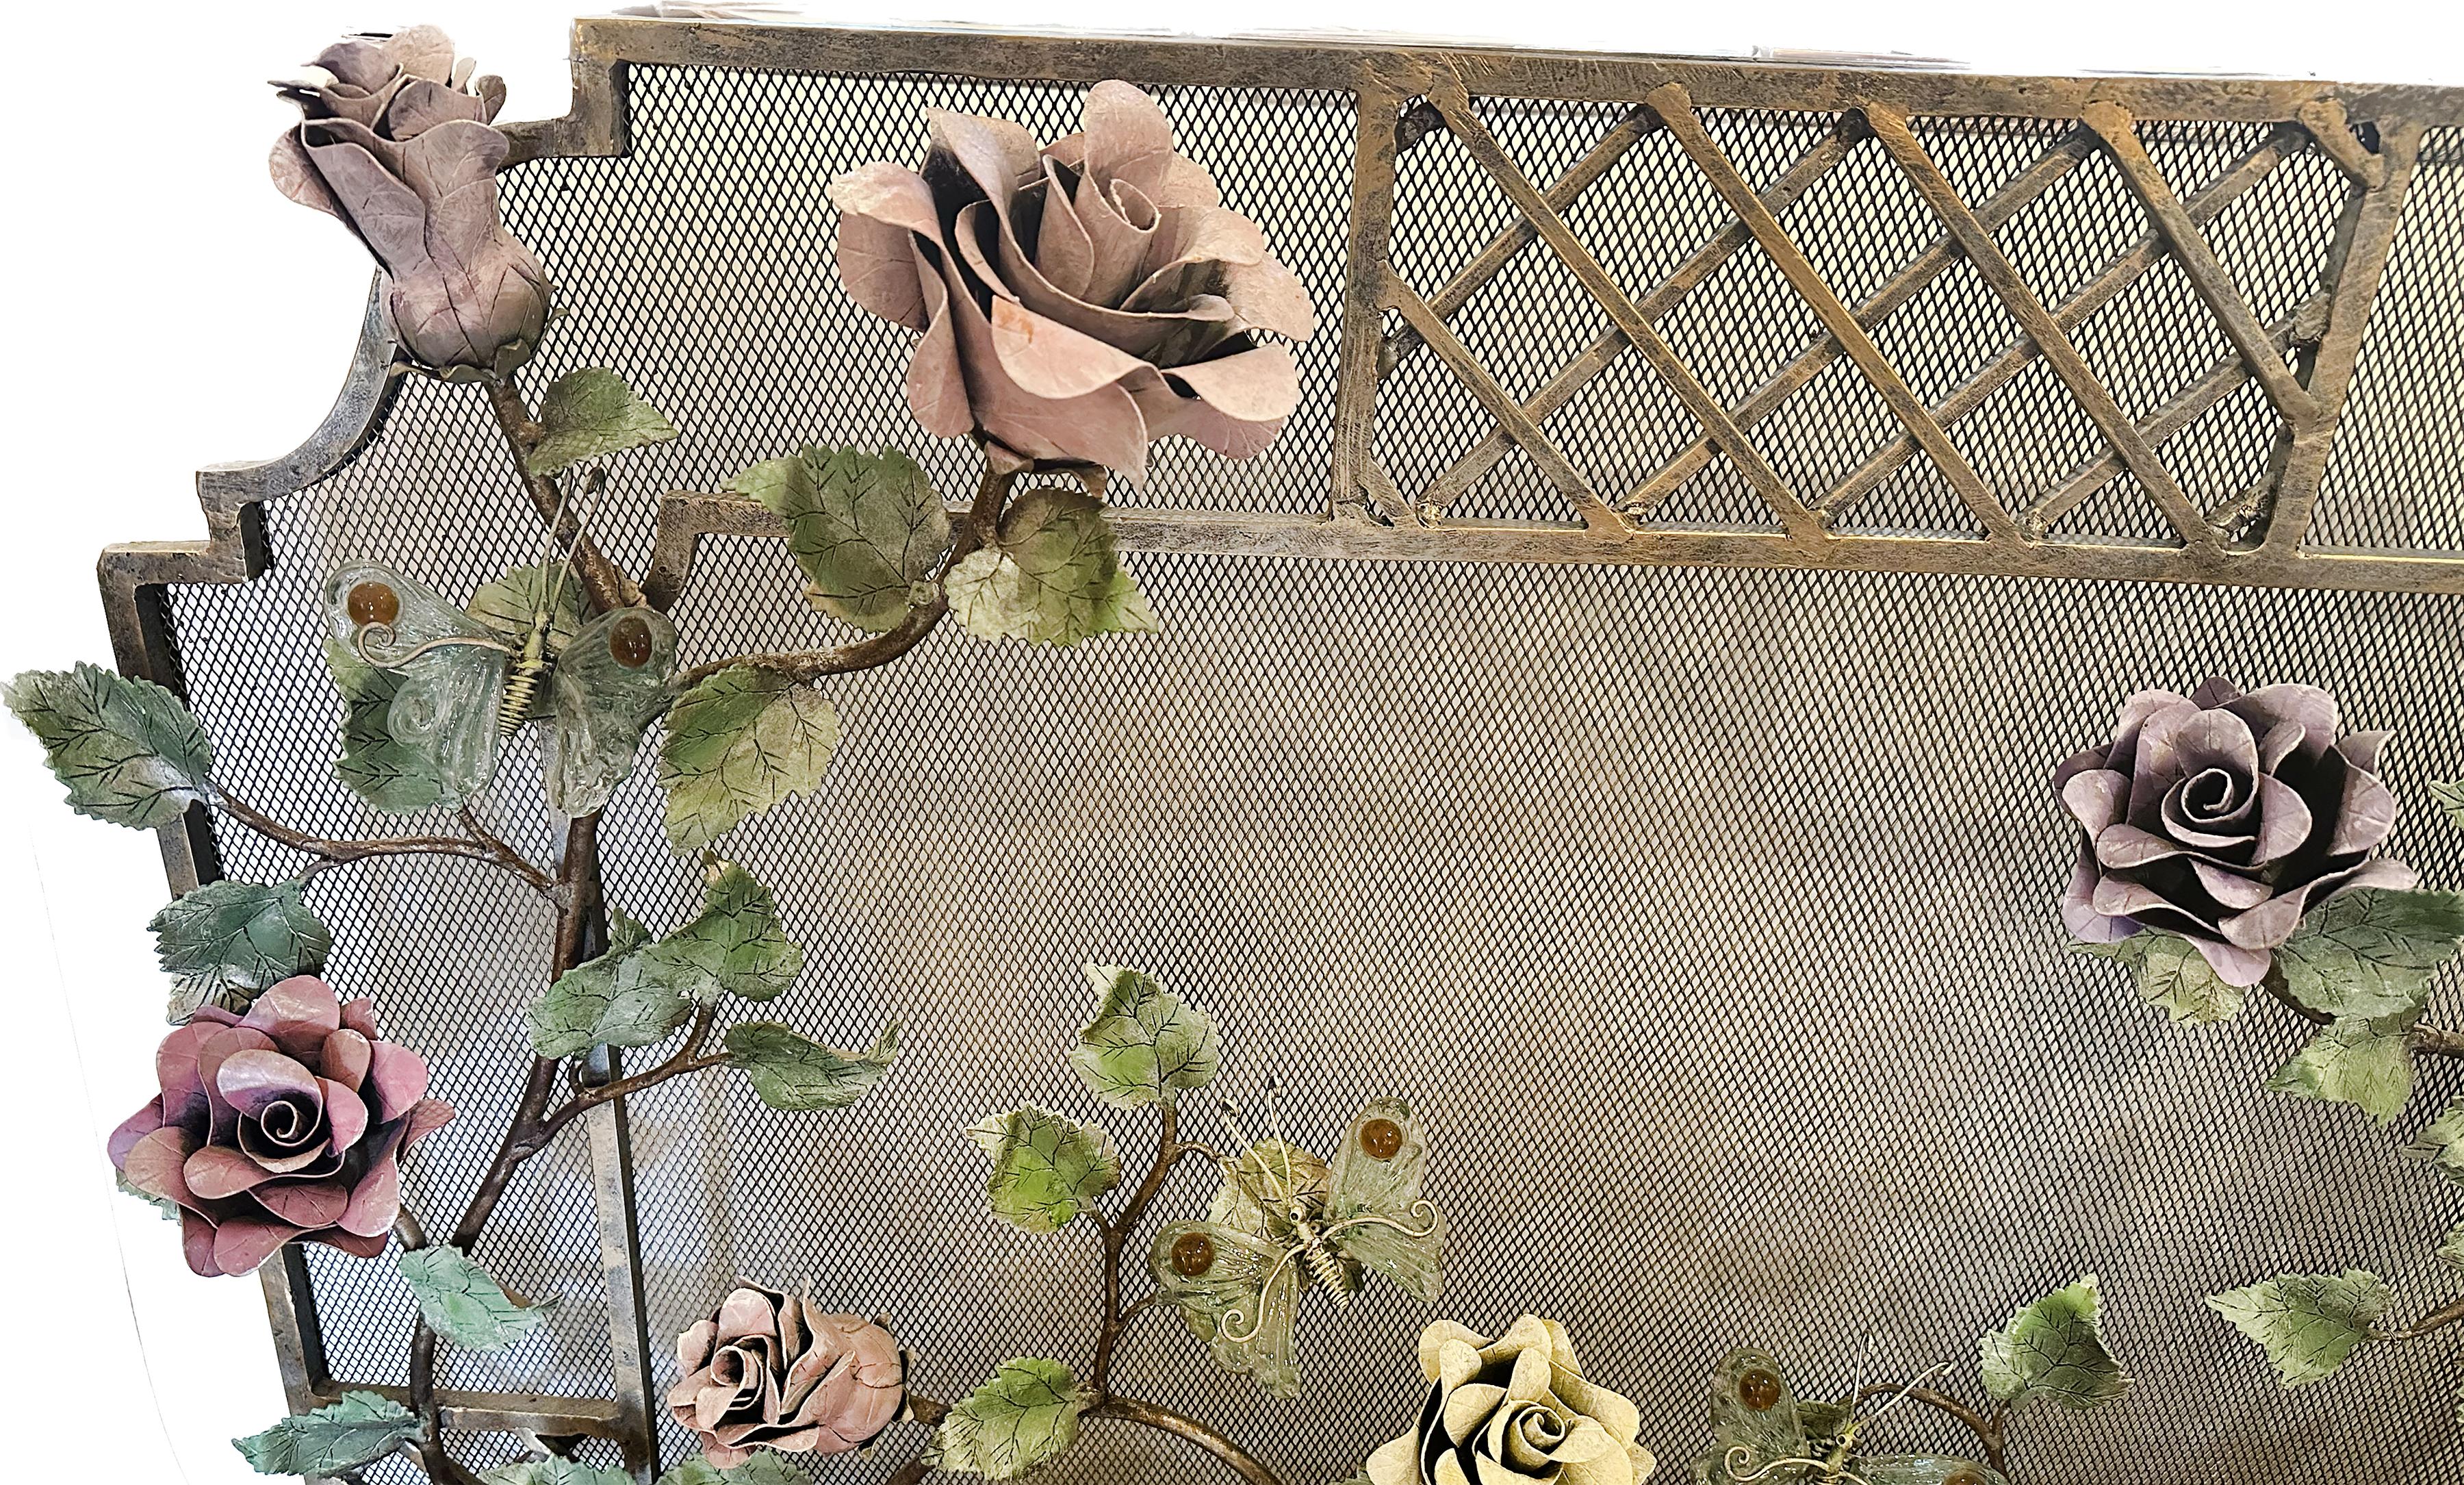 A stunning Late 20th century Bespoke Fireplace Screen. Heavy mesh with highly detailed ornate custom cast vines and roses. Vines and flowers are painted in a lacquer finish with a gold tinge. The flowers come in varieties of yellow, purple, red, and